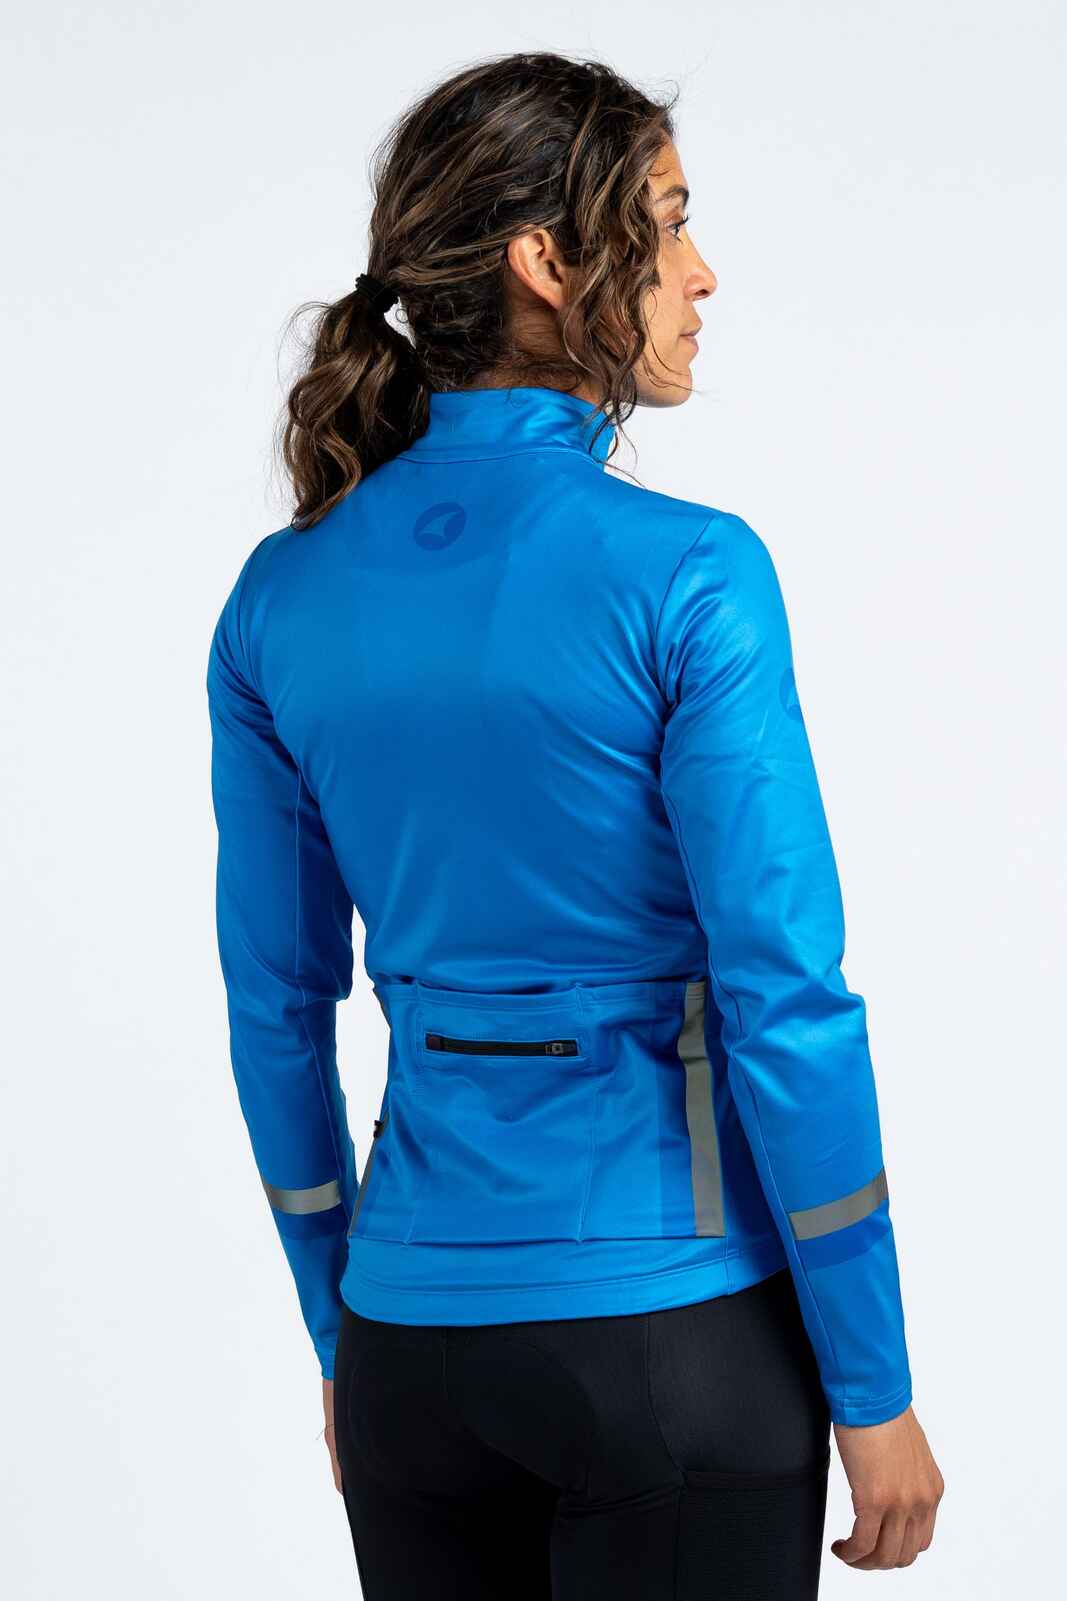 Women's Blue Thermal Cycling Jersey - Back View